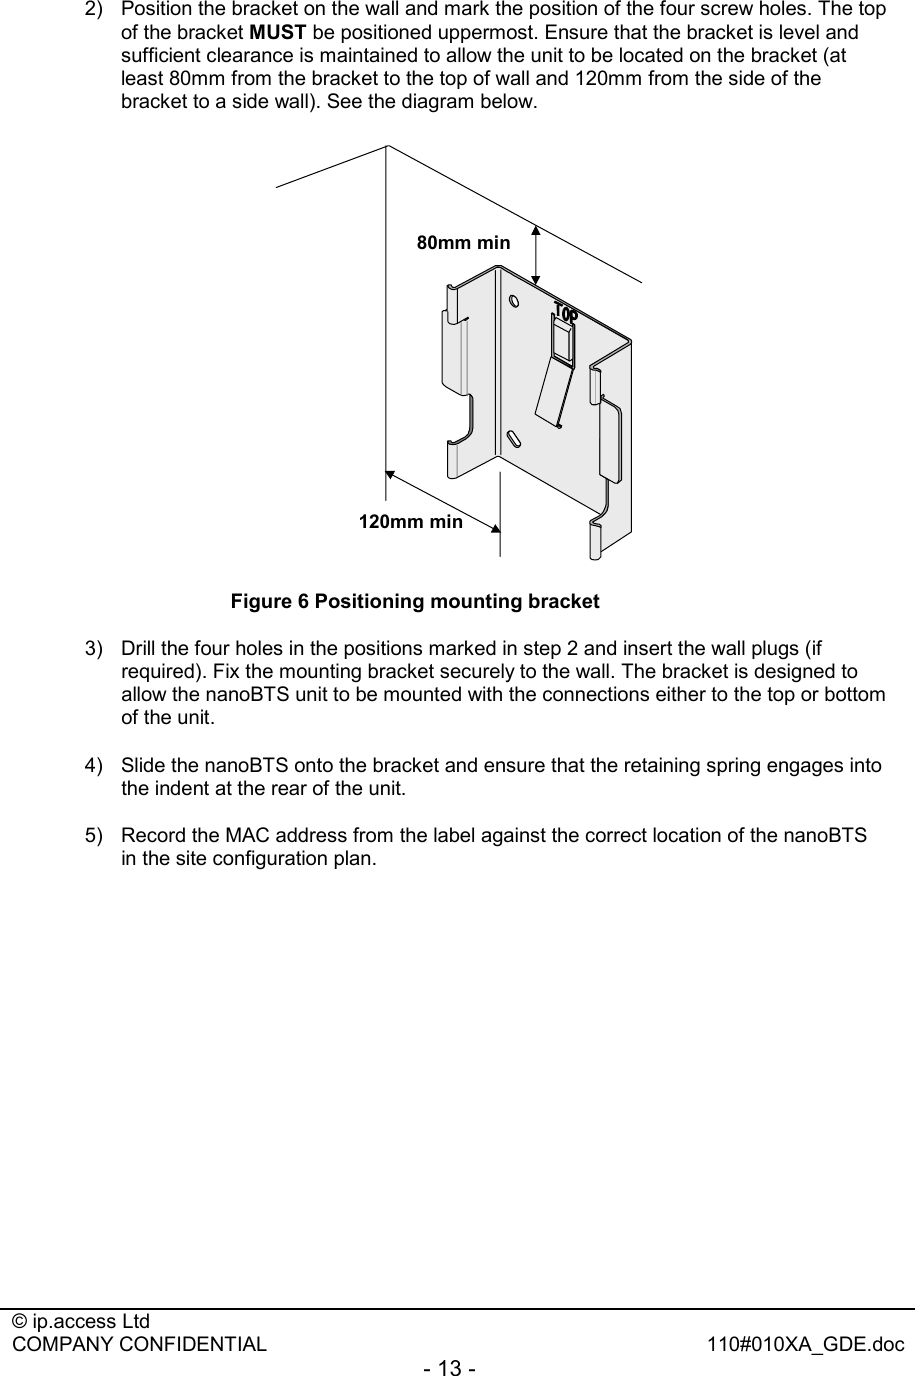  © ip.access Ltd   COMPANY CONFIDENTIAL  110#010XA_GDE.doc - 13 -  2)  Position the bracket on the wall and mark the position of the four screw holes. The top of the bracket MUST be positioned uppermost. Ensure that the bracket is level and sufficient clearance is maintained to allow the unit to be located on the bracket (at least 80mm from the bracket to the top of wall and 120mm from the side of the bracket to a side wall). See the diagram below.   80mm min120mm min Figure 6 Positioning mounting bracket 3)  Drill the four holes in the positions marked in step 2 and insert the wall plugs (if required). Fix the mounting bracket securely to the wall. The bracket is designed to allow the nanoBTS unit to be mounted with the connections either to the top or bottom of the unit. 4)  Slide the nanoBTS onto the bracket and ensure that the retaining spring engages into the indent at the rear of the unit.  5)  Record the MAC address from the label against the correct location of the nanoBTS in the site configuration plan.  